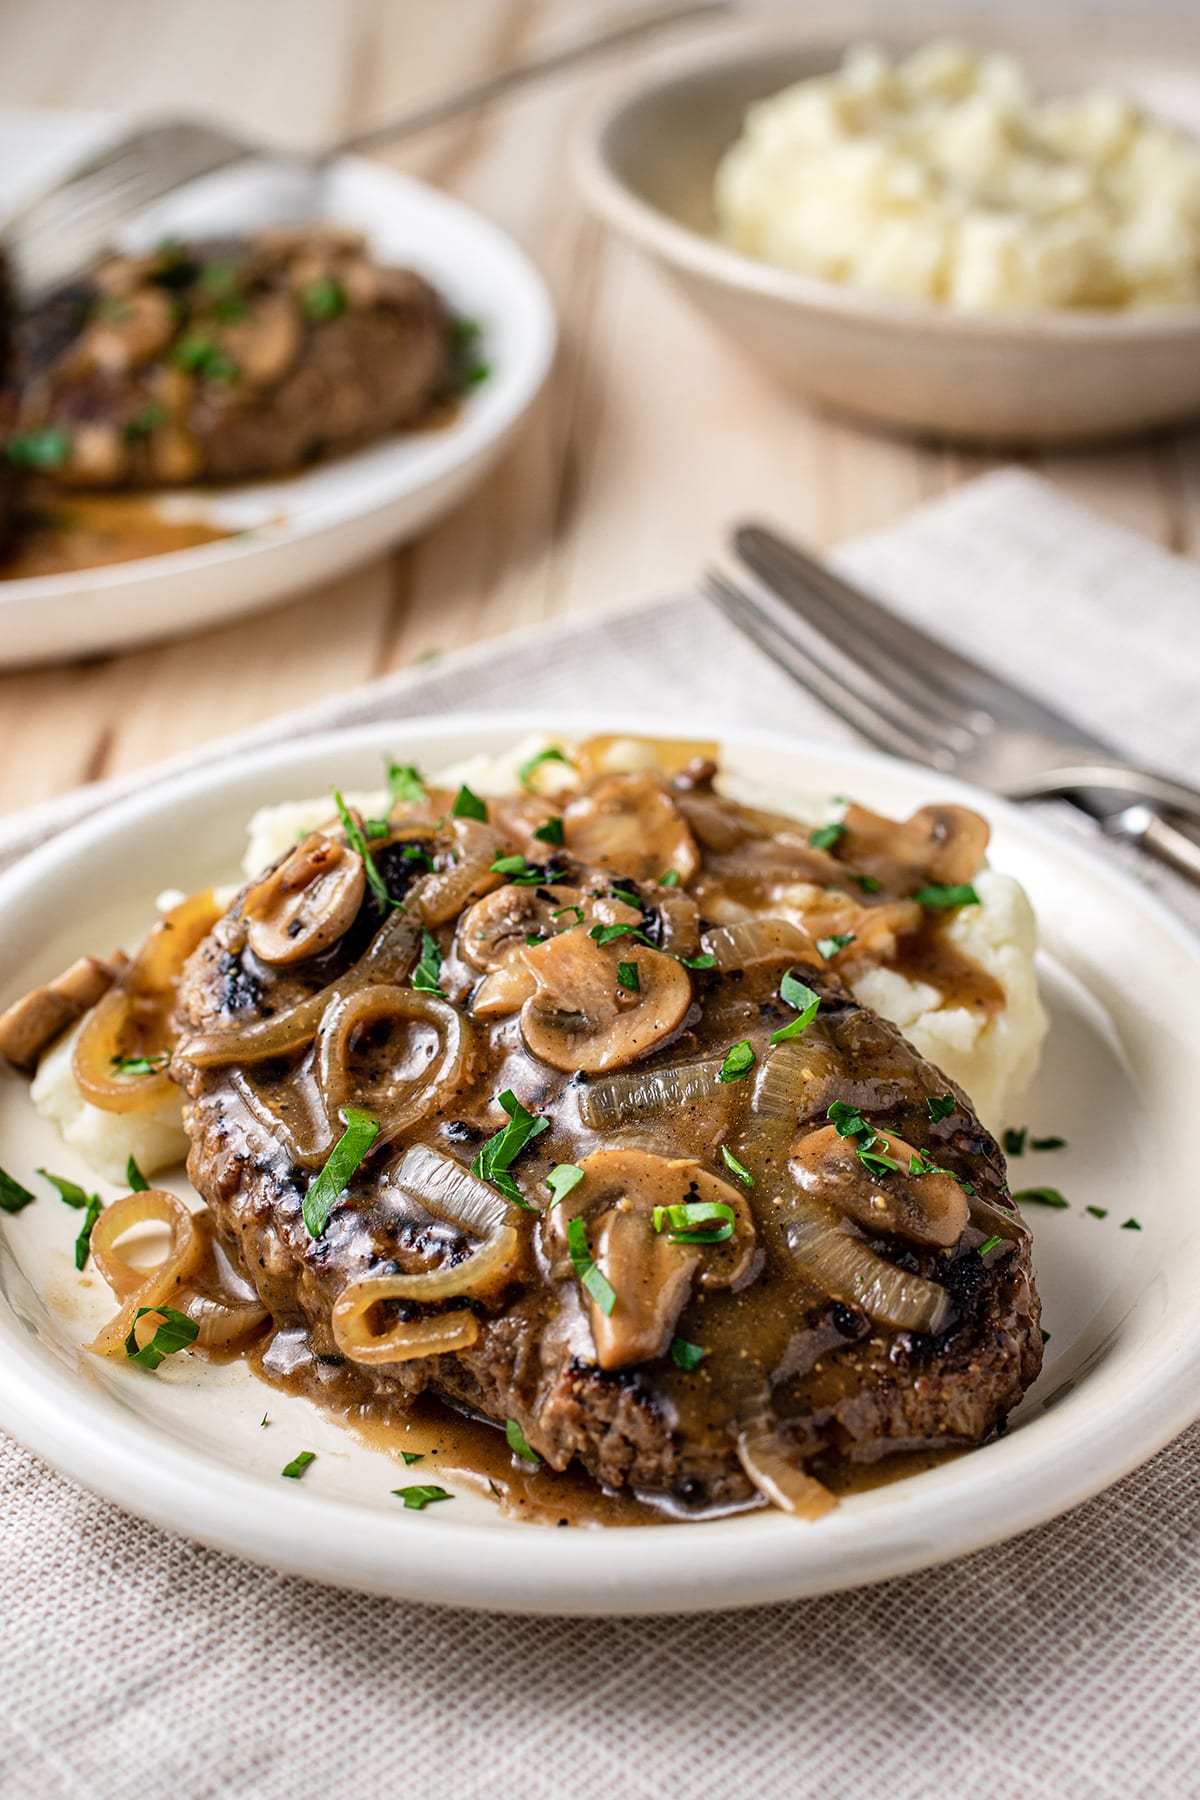 How To Make Salisbury Steak At Home - COOKtheSTORY